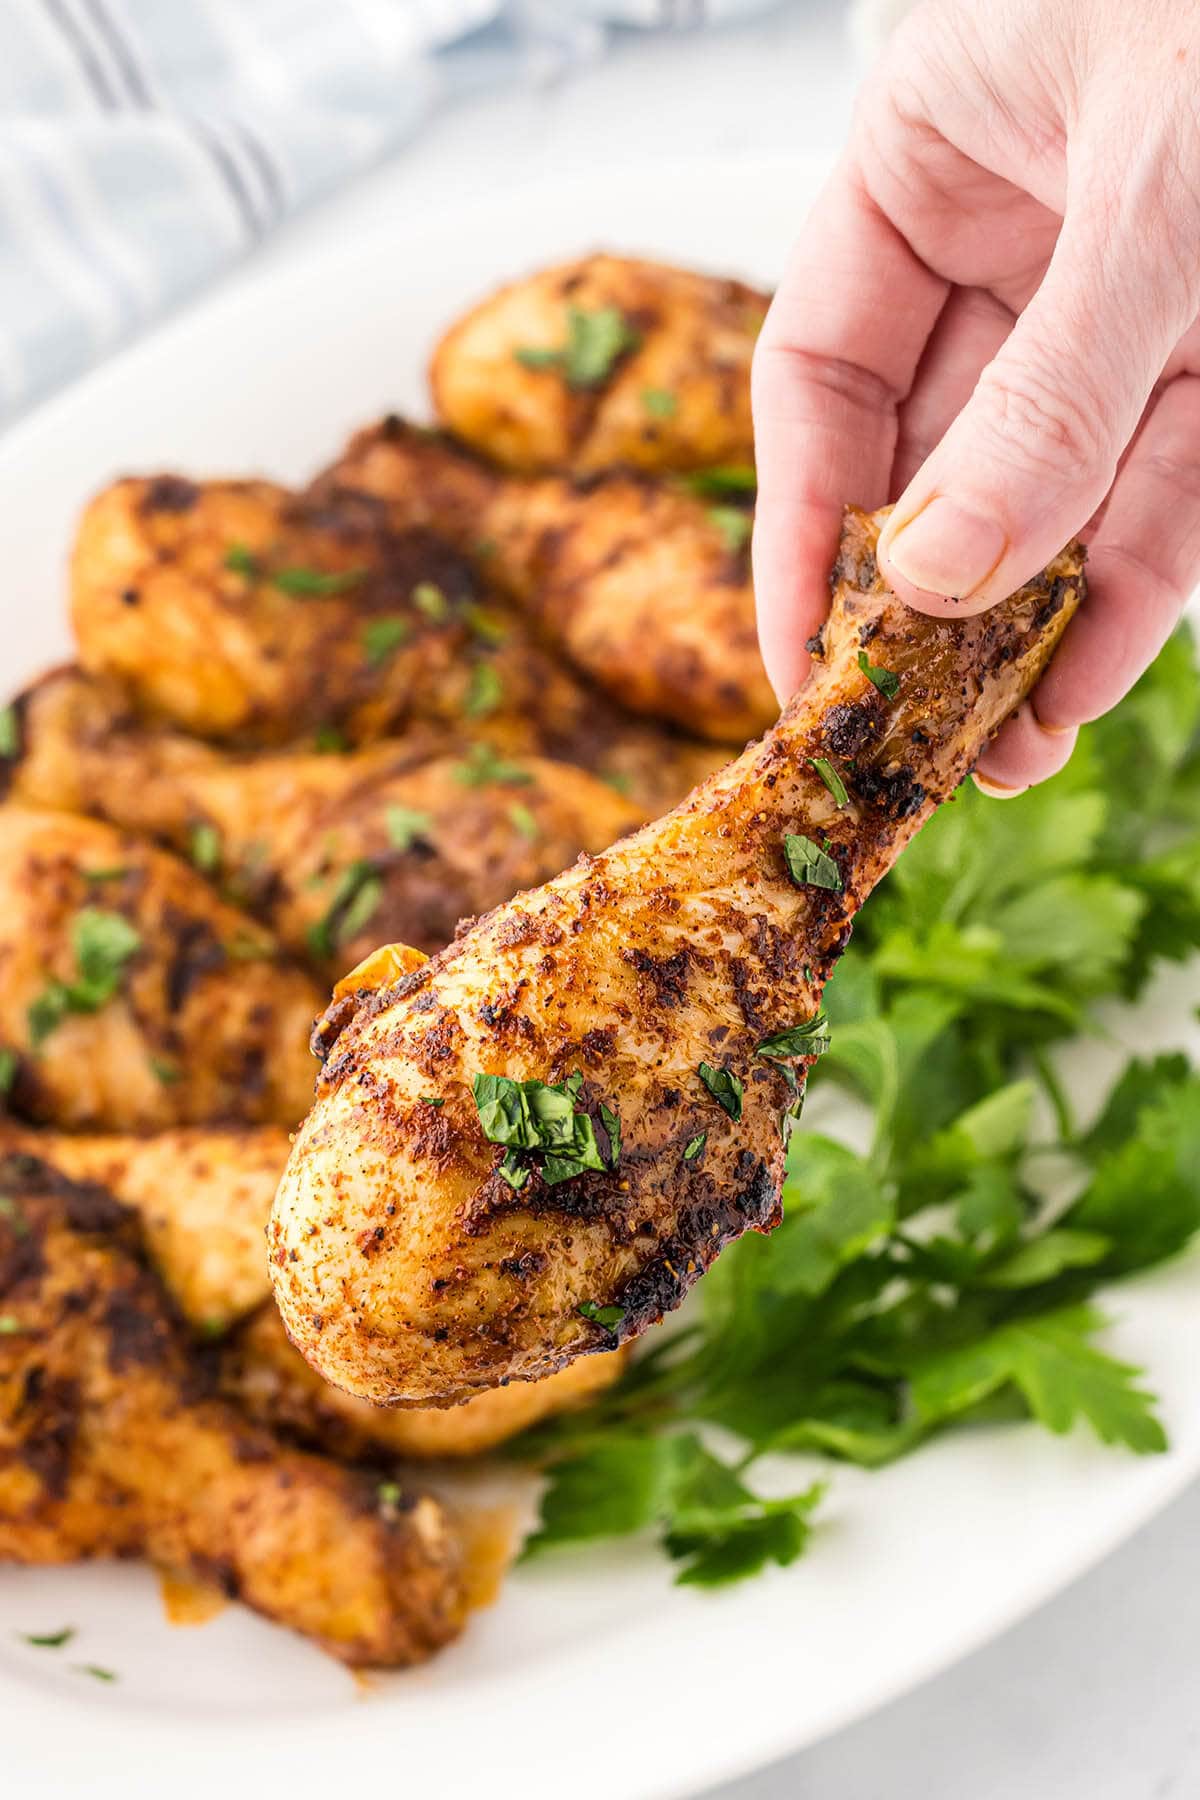 Grilled chicken drumsticks on a platter garnished with chopped parsley. A hand is holding a cooked chicken leg.